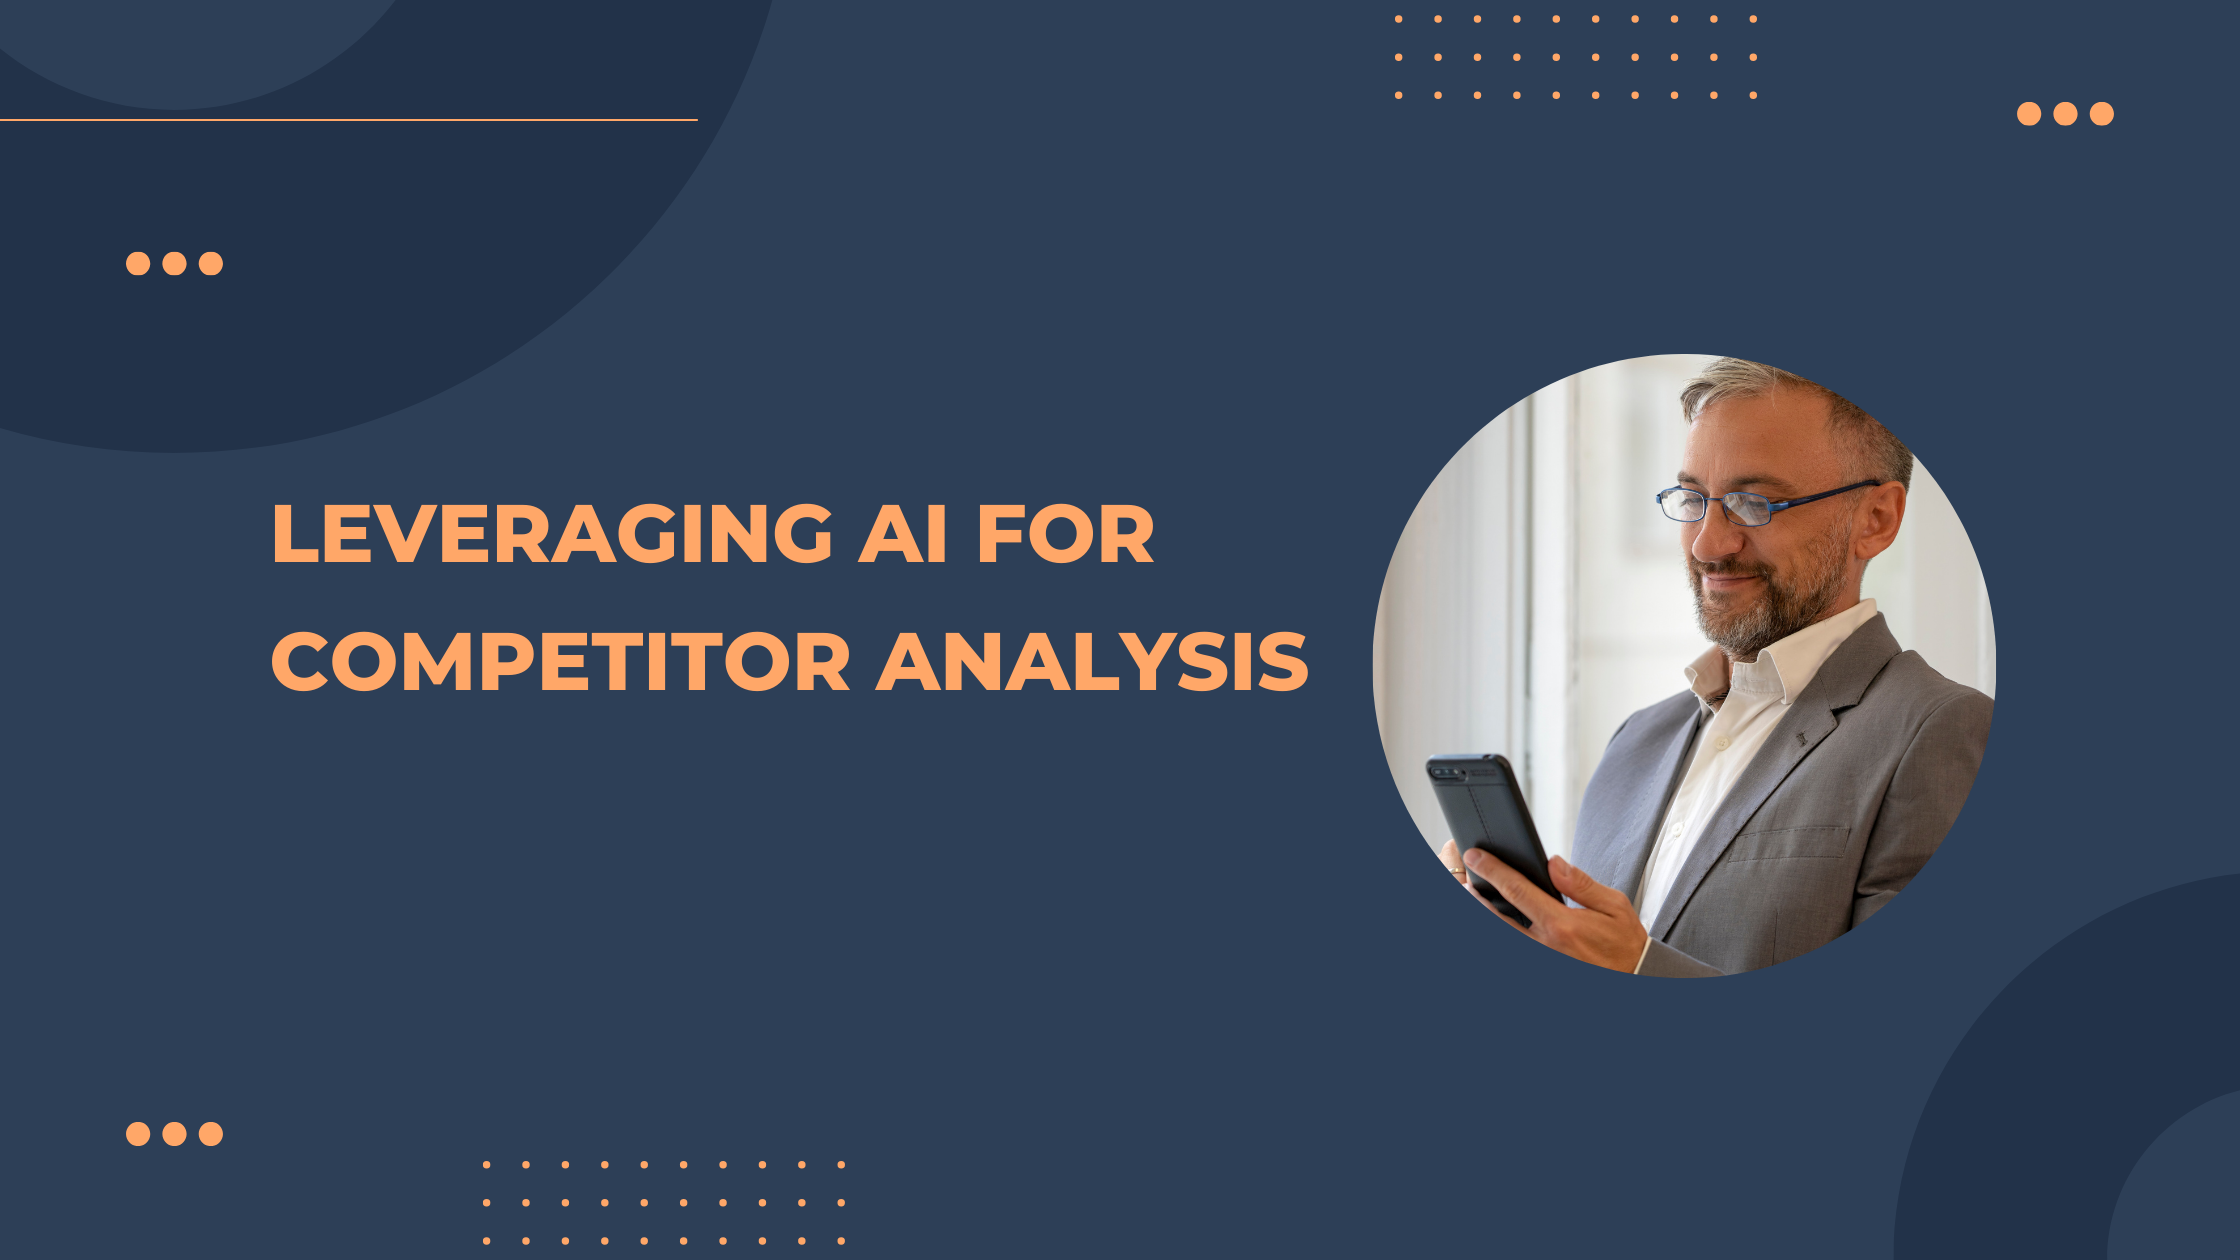 Leveraging AI for Competitor Analysis